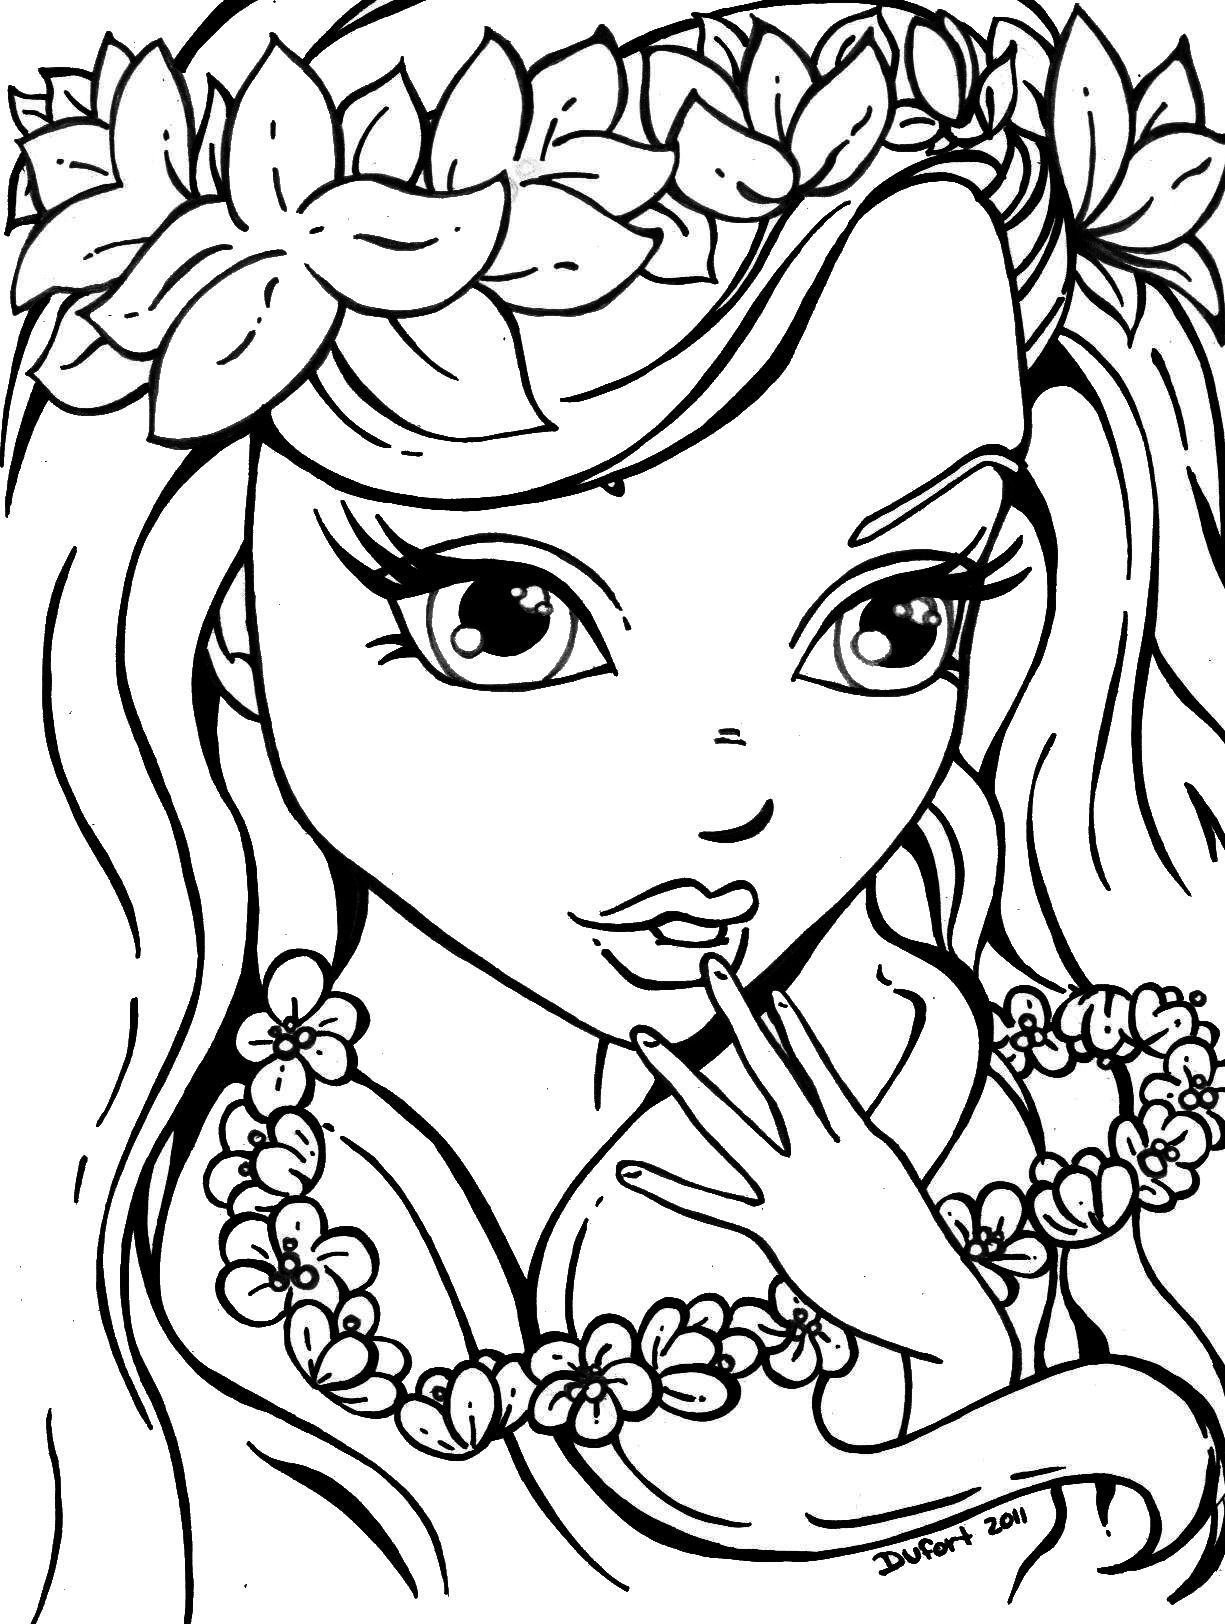 Free Coloring Pages Teens, Download Free Coloring Pages Teens png ...